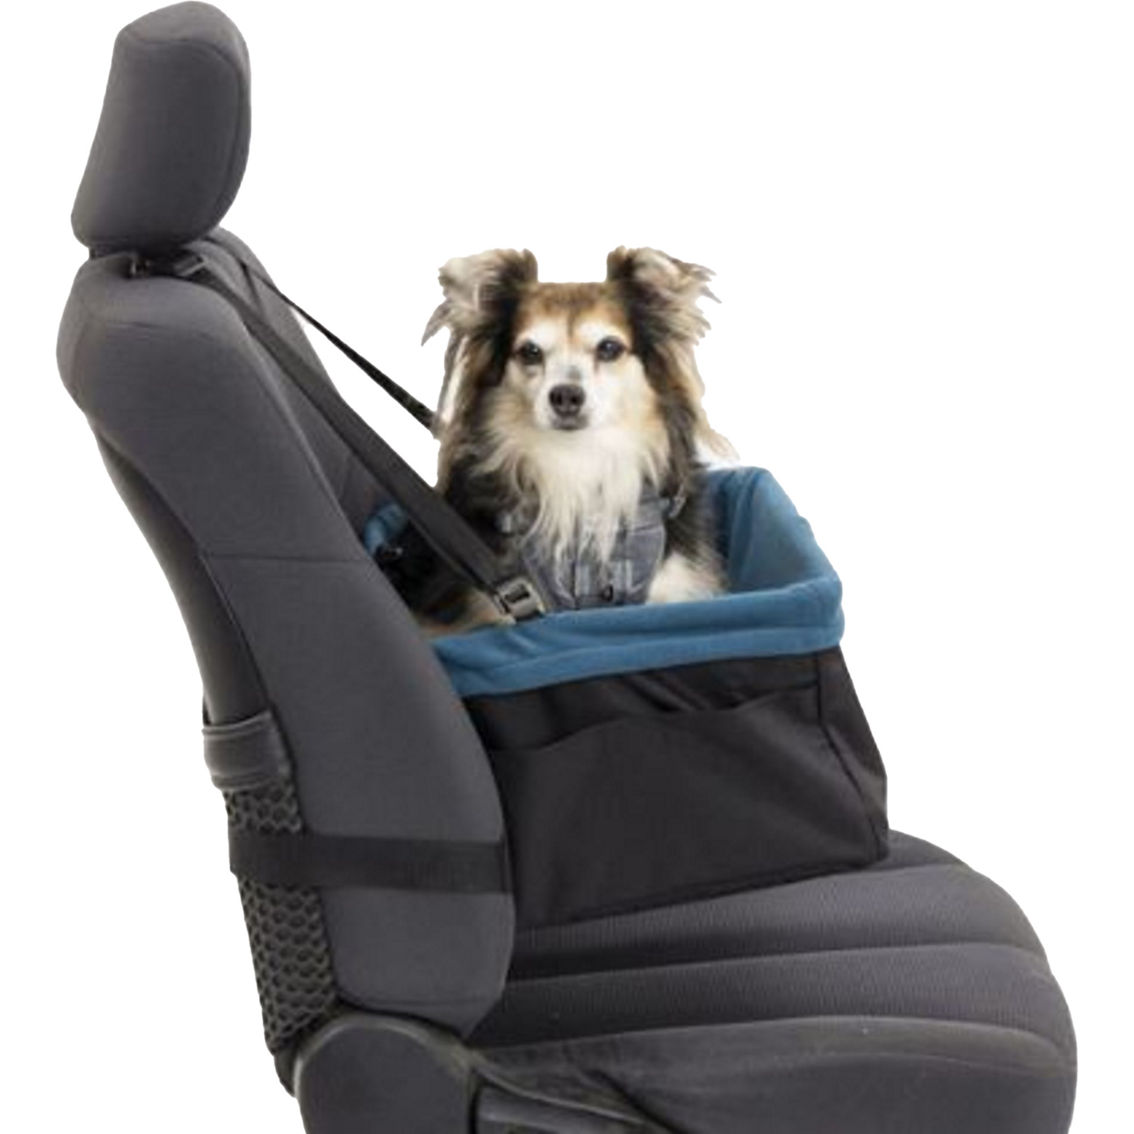 Kurgo Rover Dog Booster Seat - Image 3 of 4